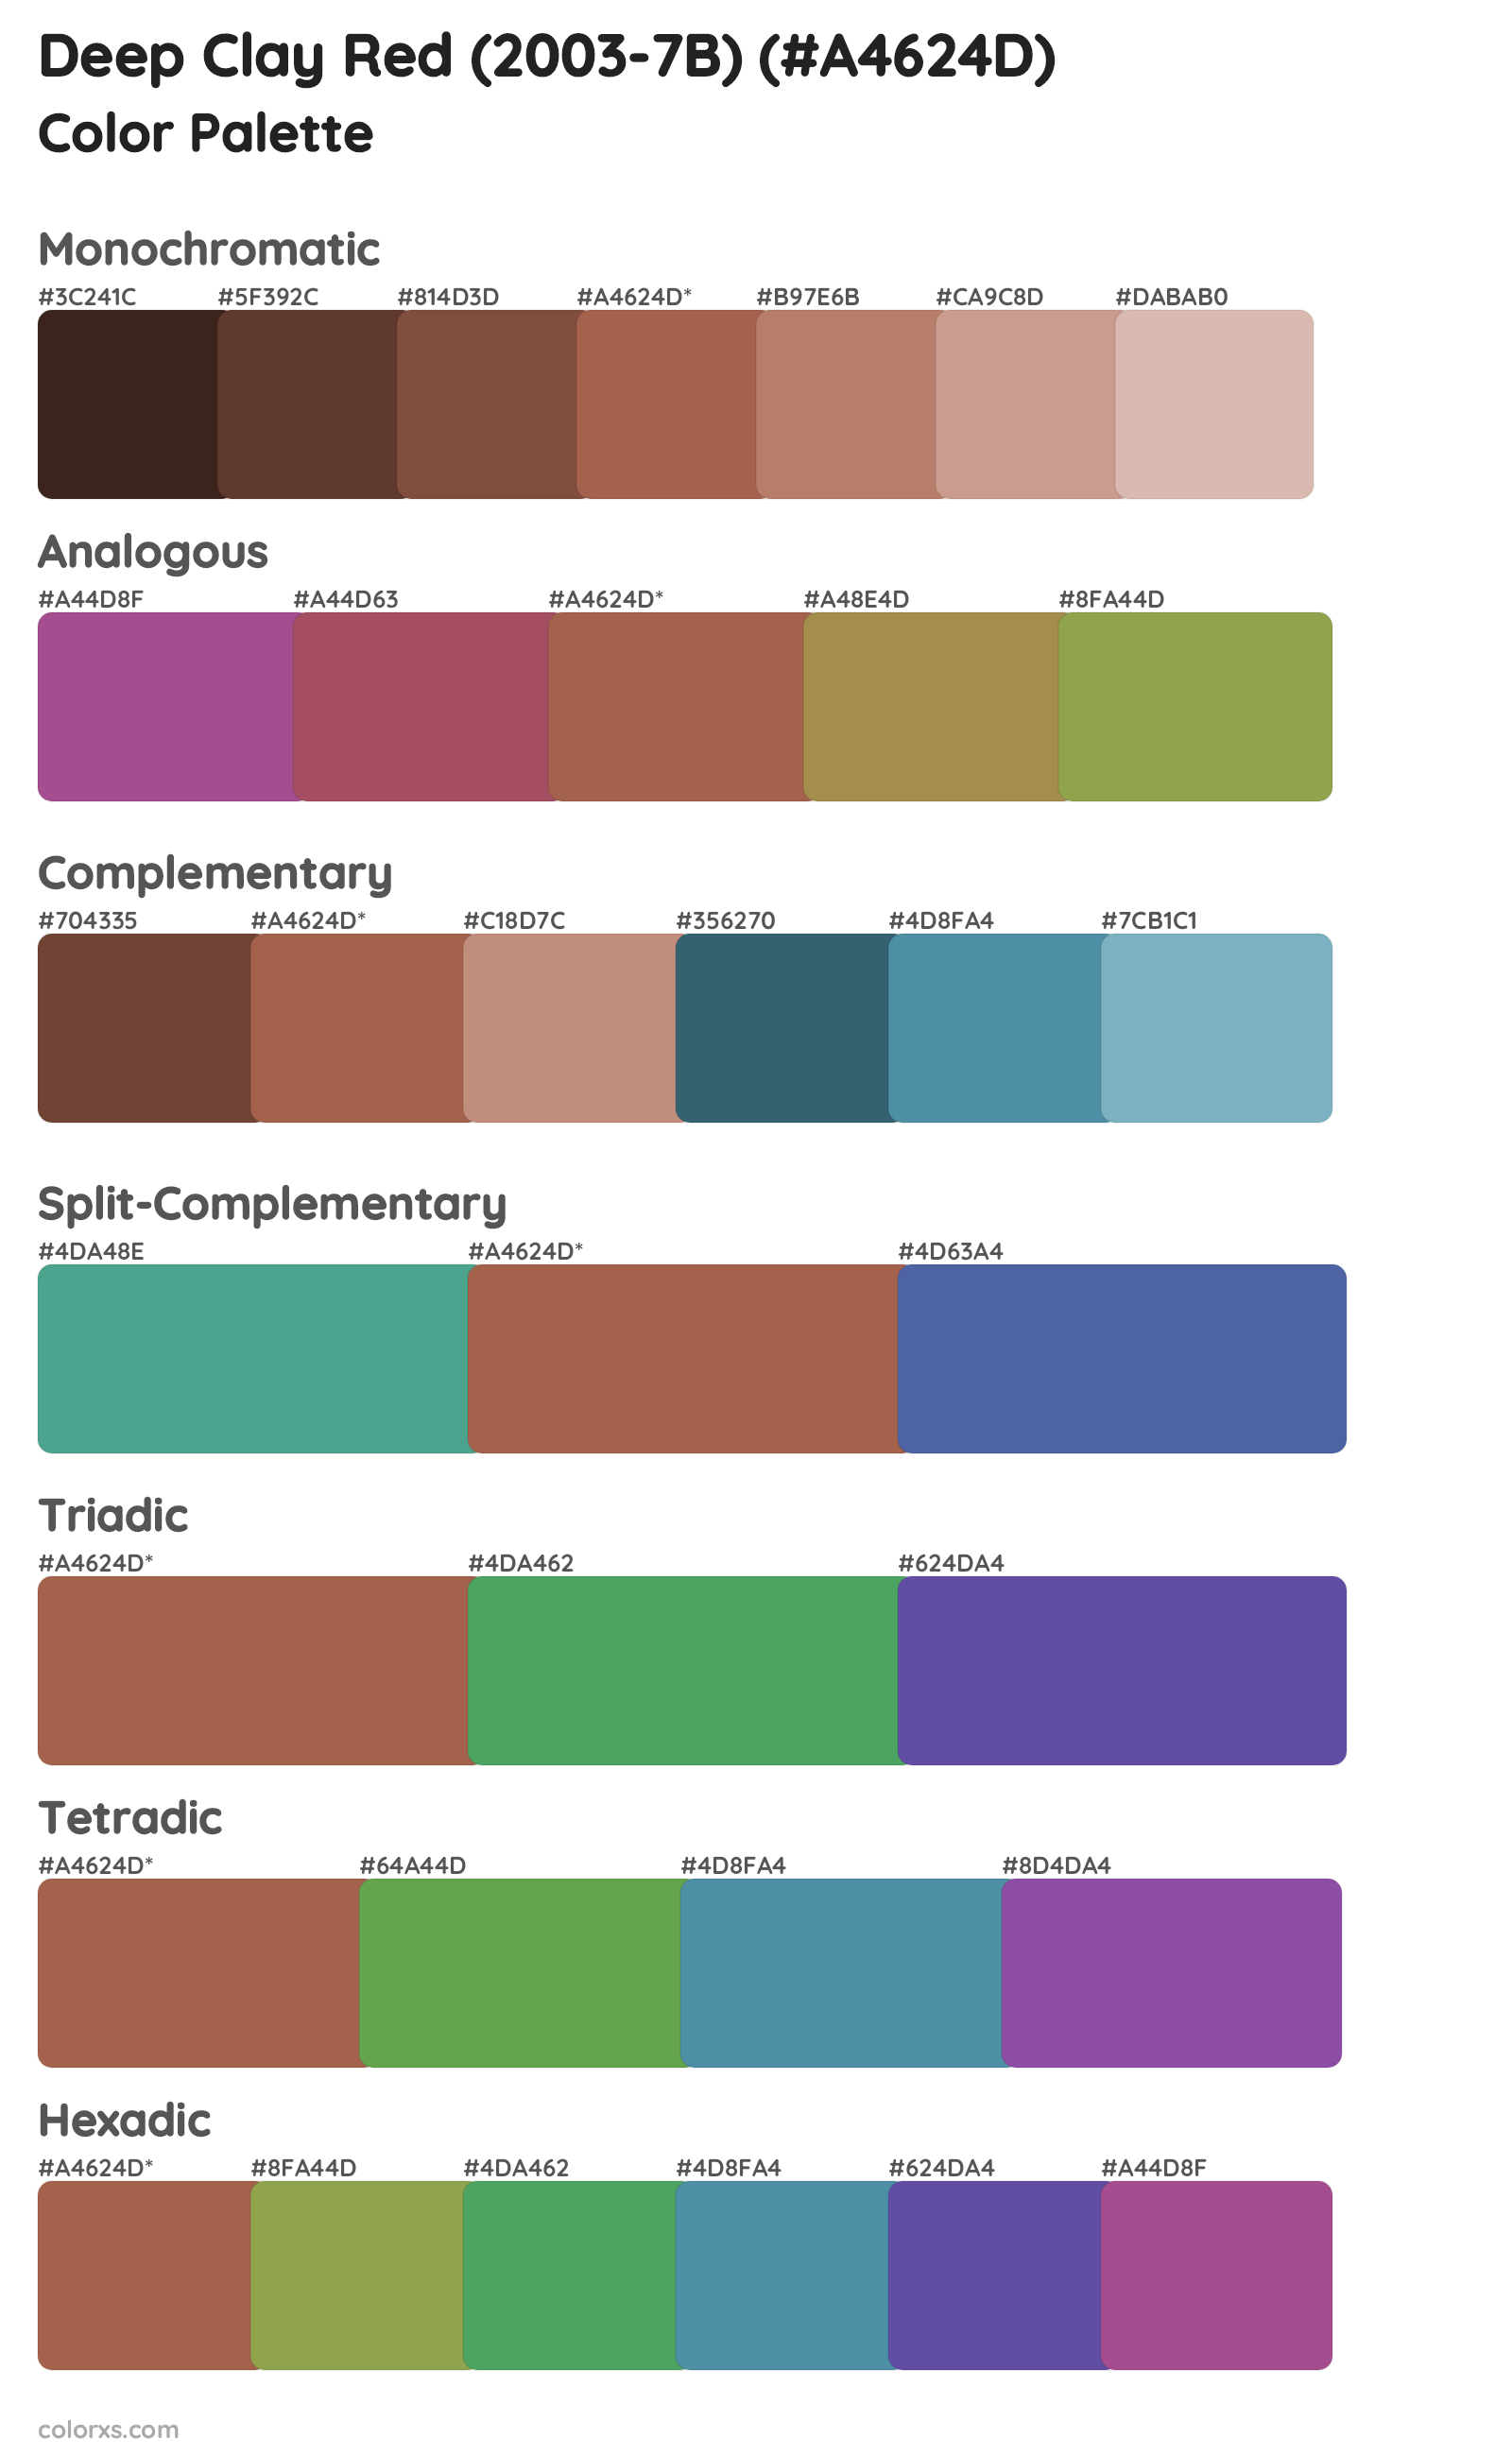 Deep Clay Red (2003-7B) Color Scheme Palettes